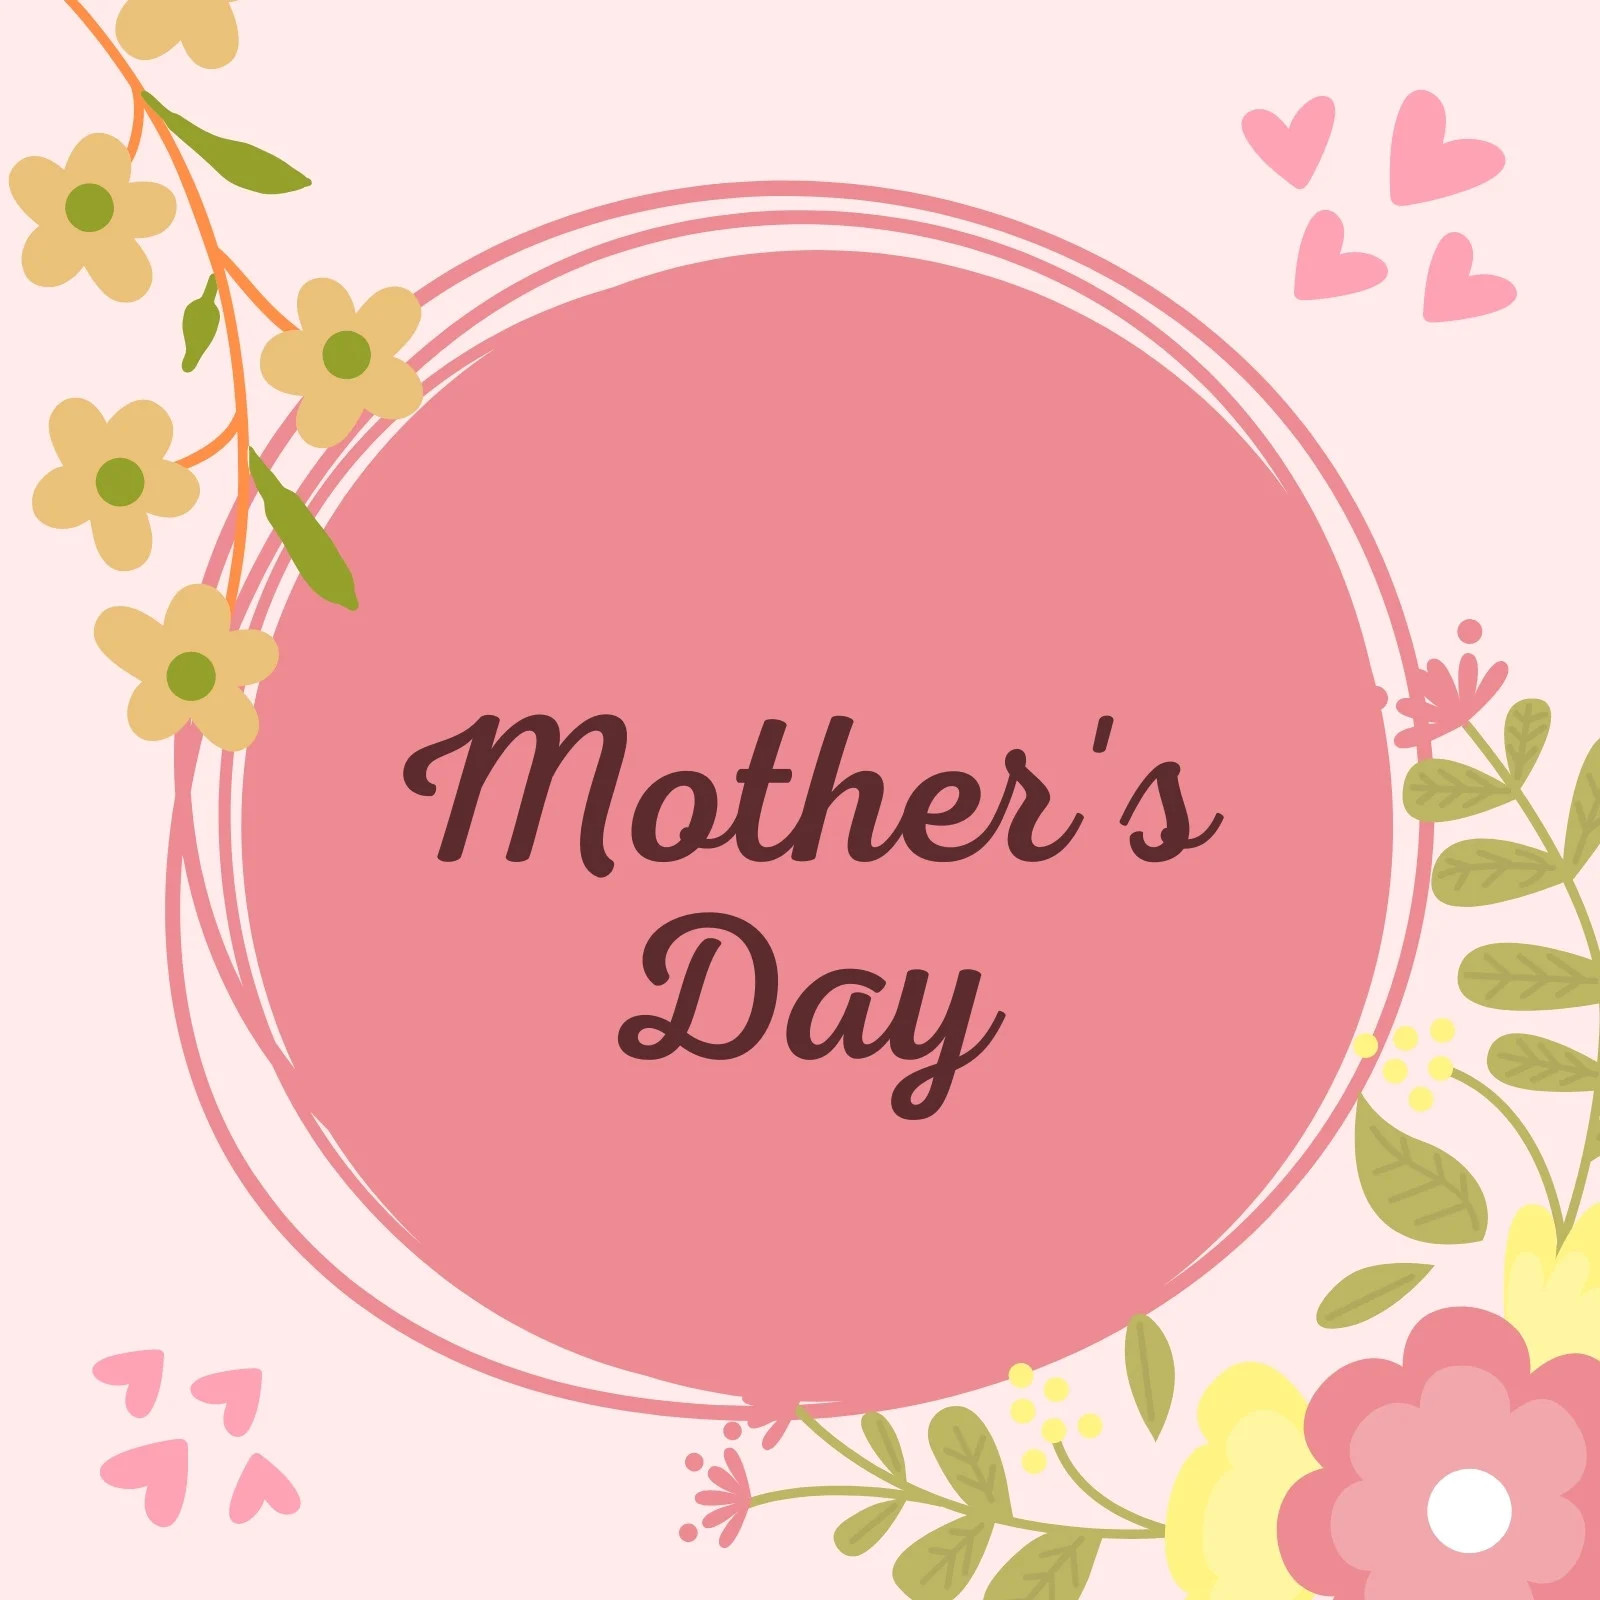 Celebrate Mom With a Special Mother’s Day Bundle